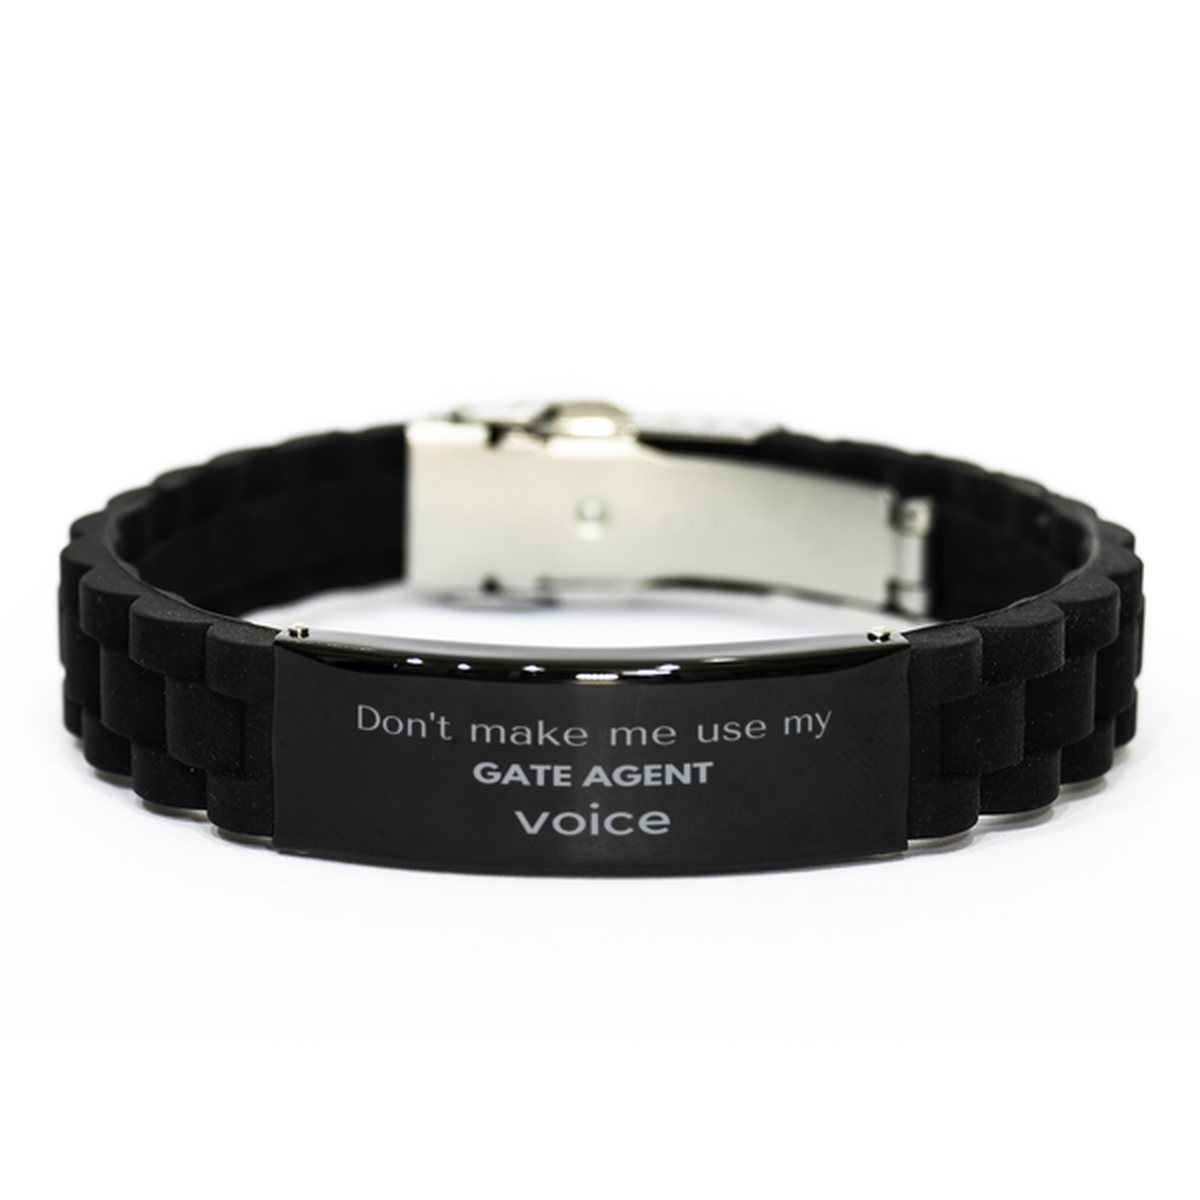 Don't make me use my Gate Agent voice, Sarcasm Gate Agent Gifts, Christmas Gate Agent Black Glidelock Clasp Bracelet Birthday Unique Gifts For Gate Agent Coworkers, Men, Women, Colleague, Friends